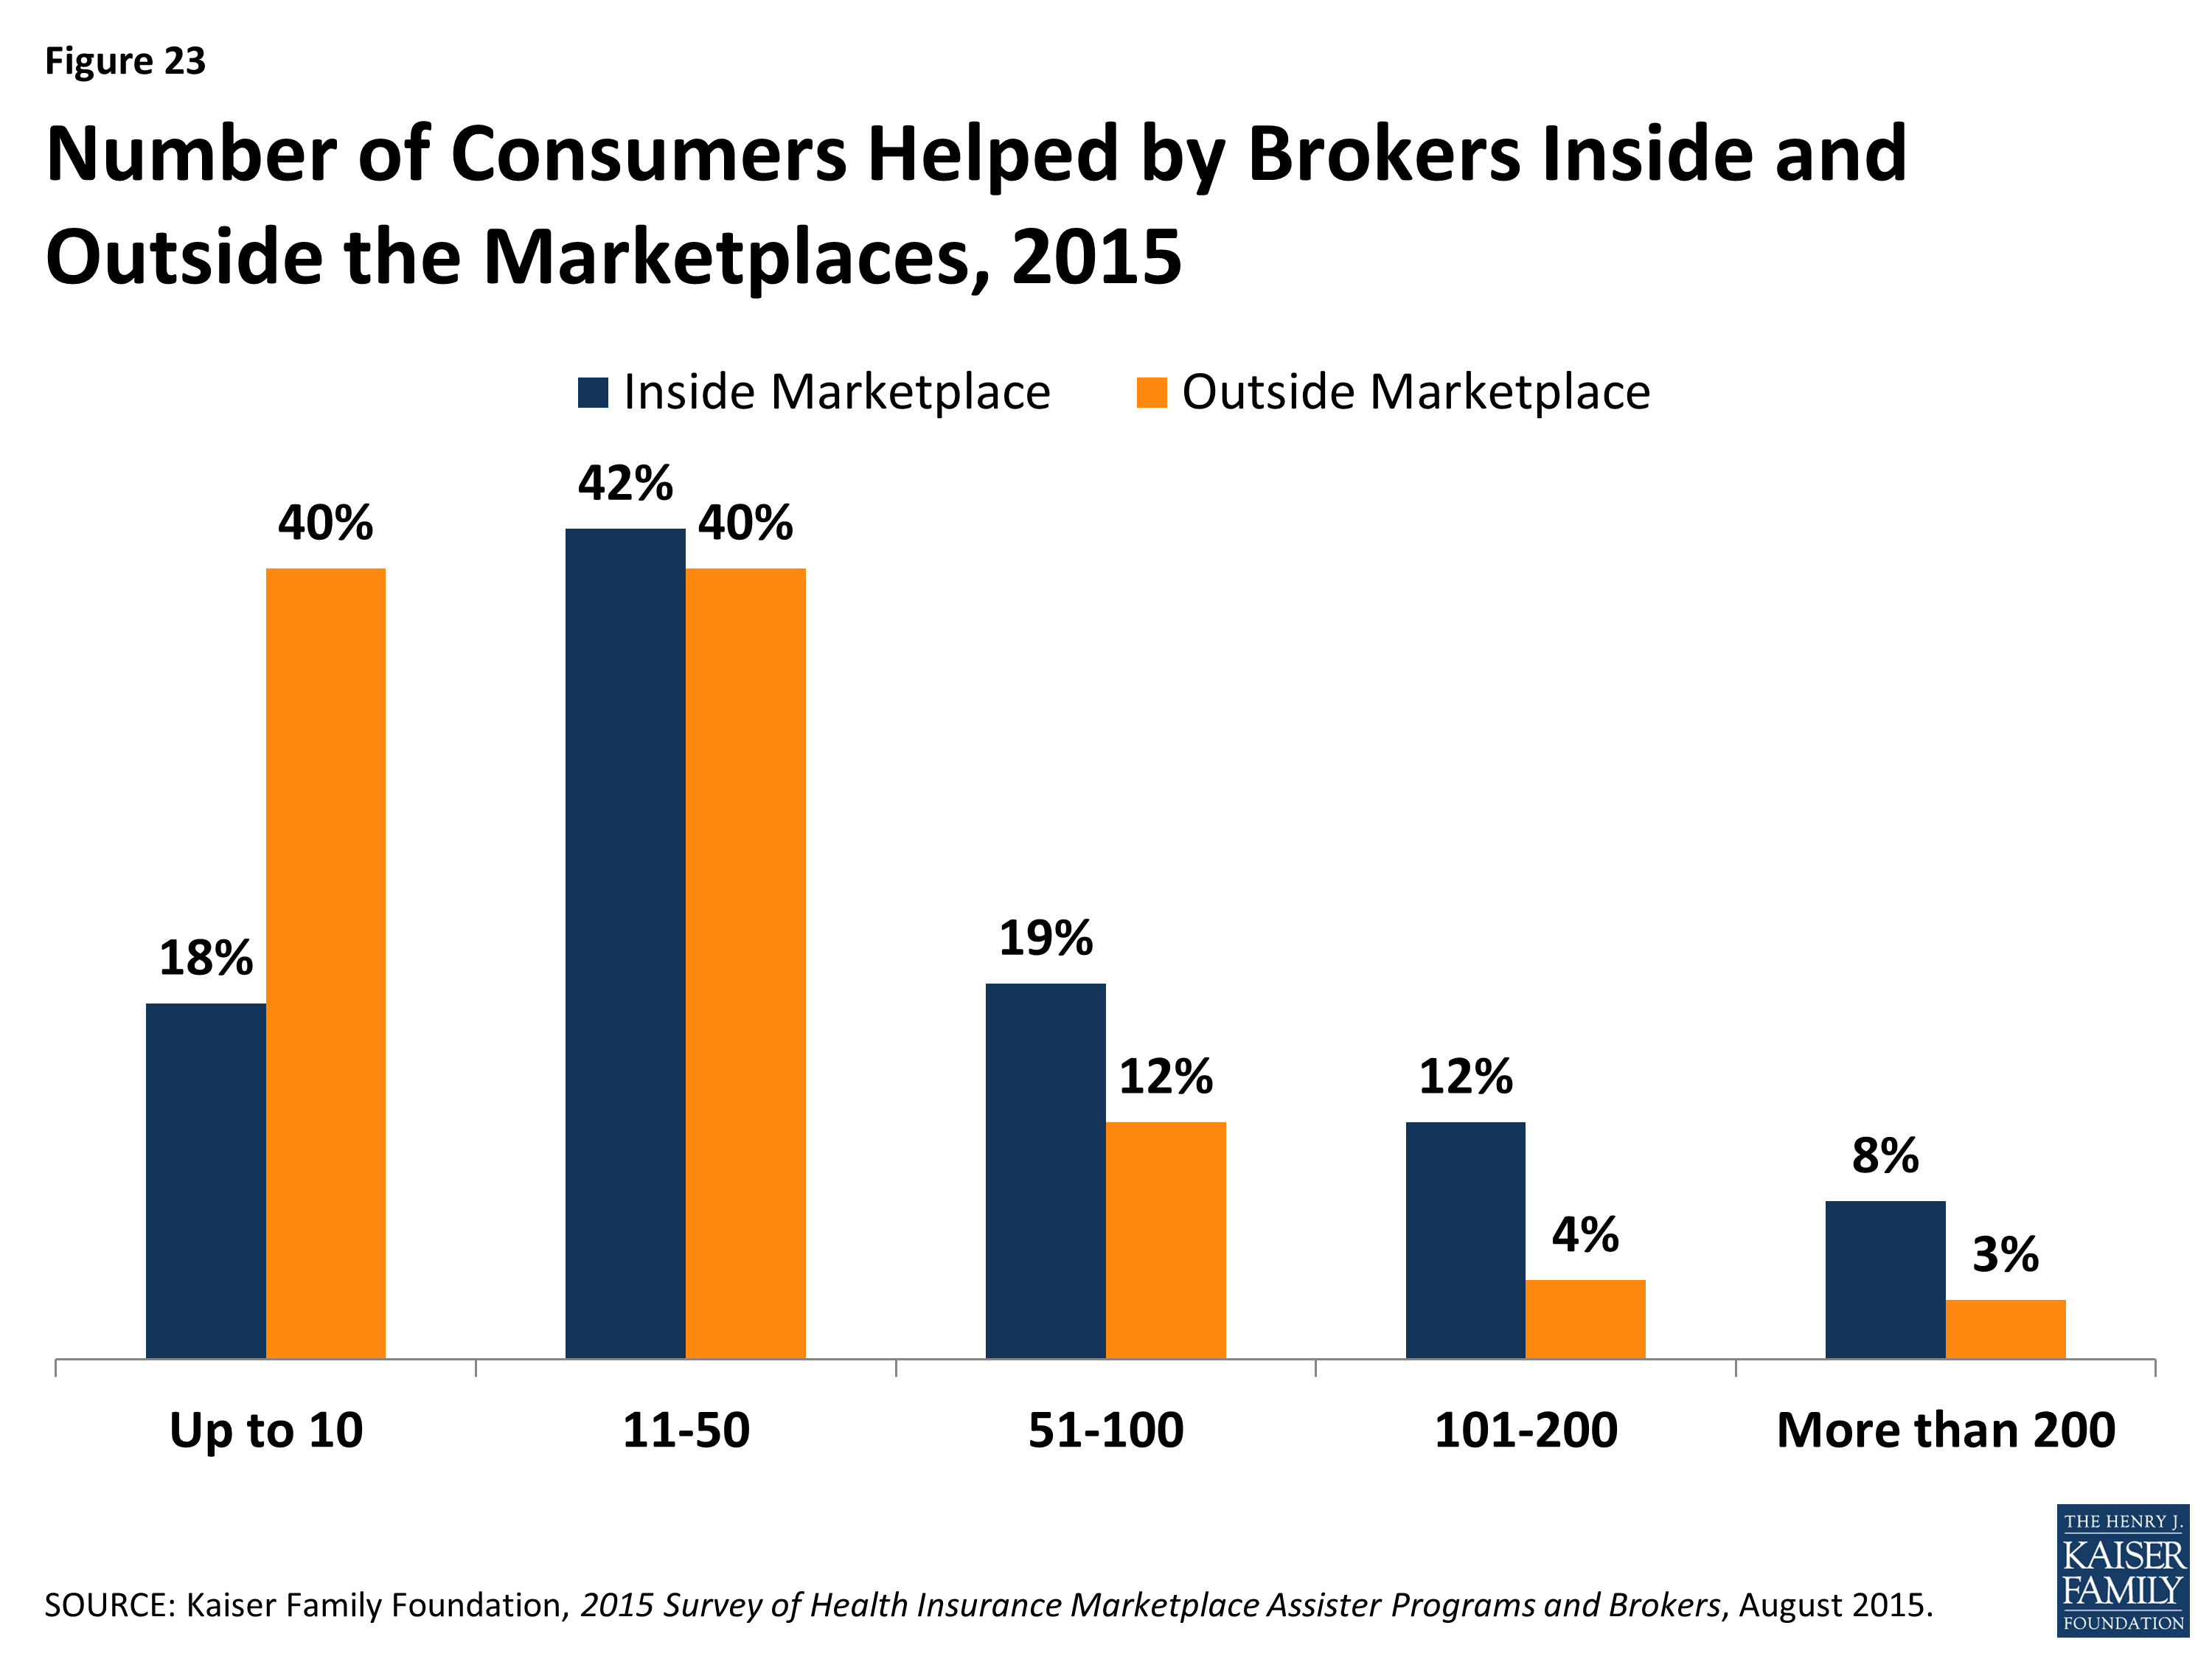 2015 Survey of Health Insurance Marketplace Assister